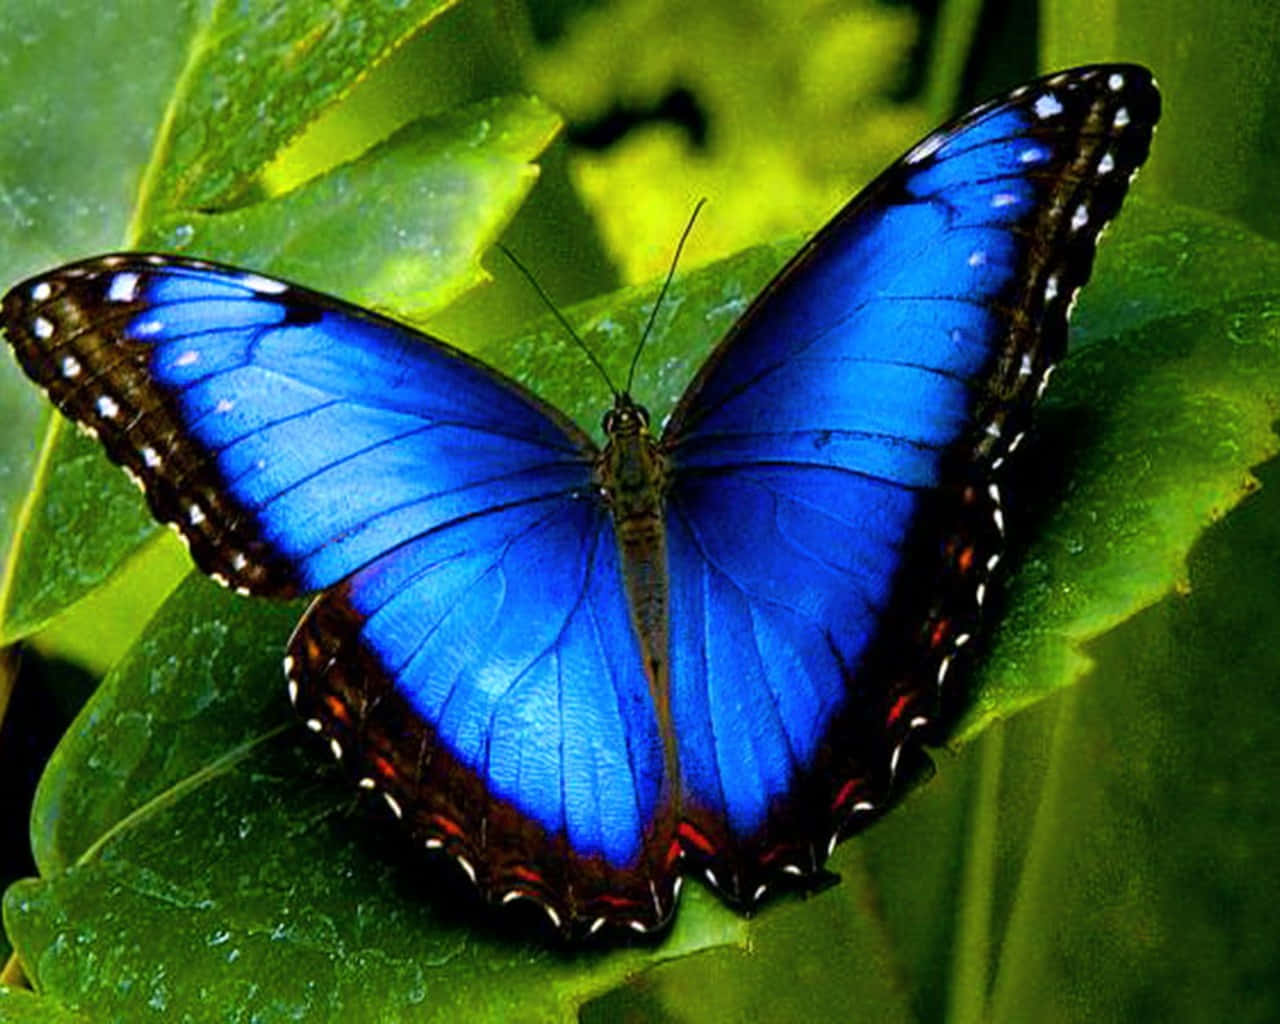 “A Stunning Display of Colorful Butterflies”